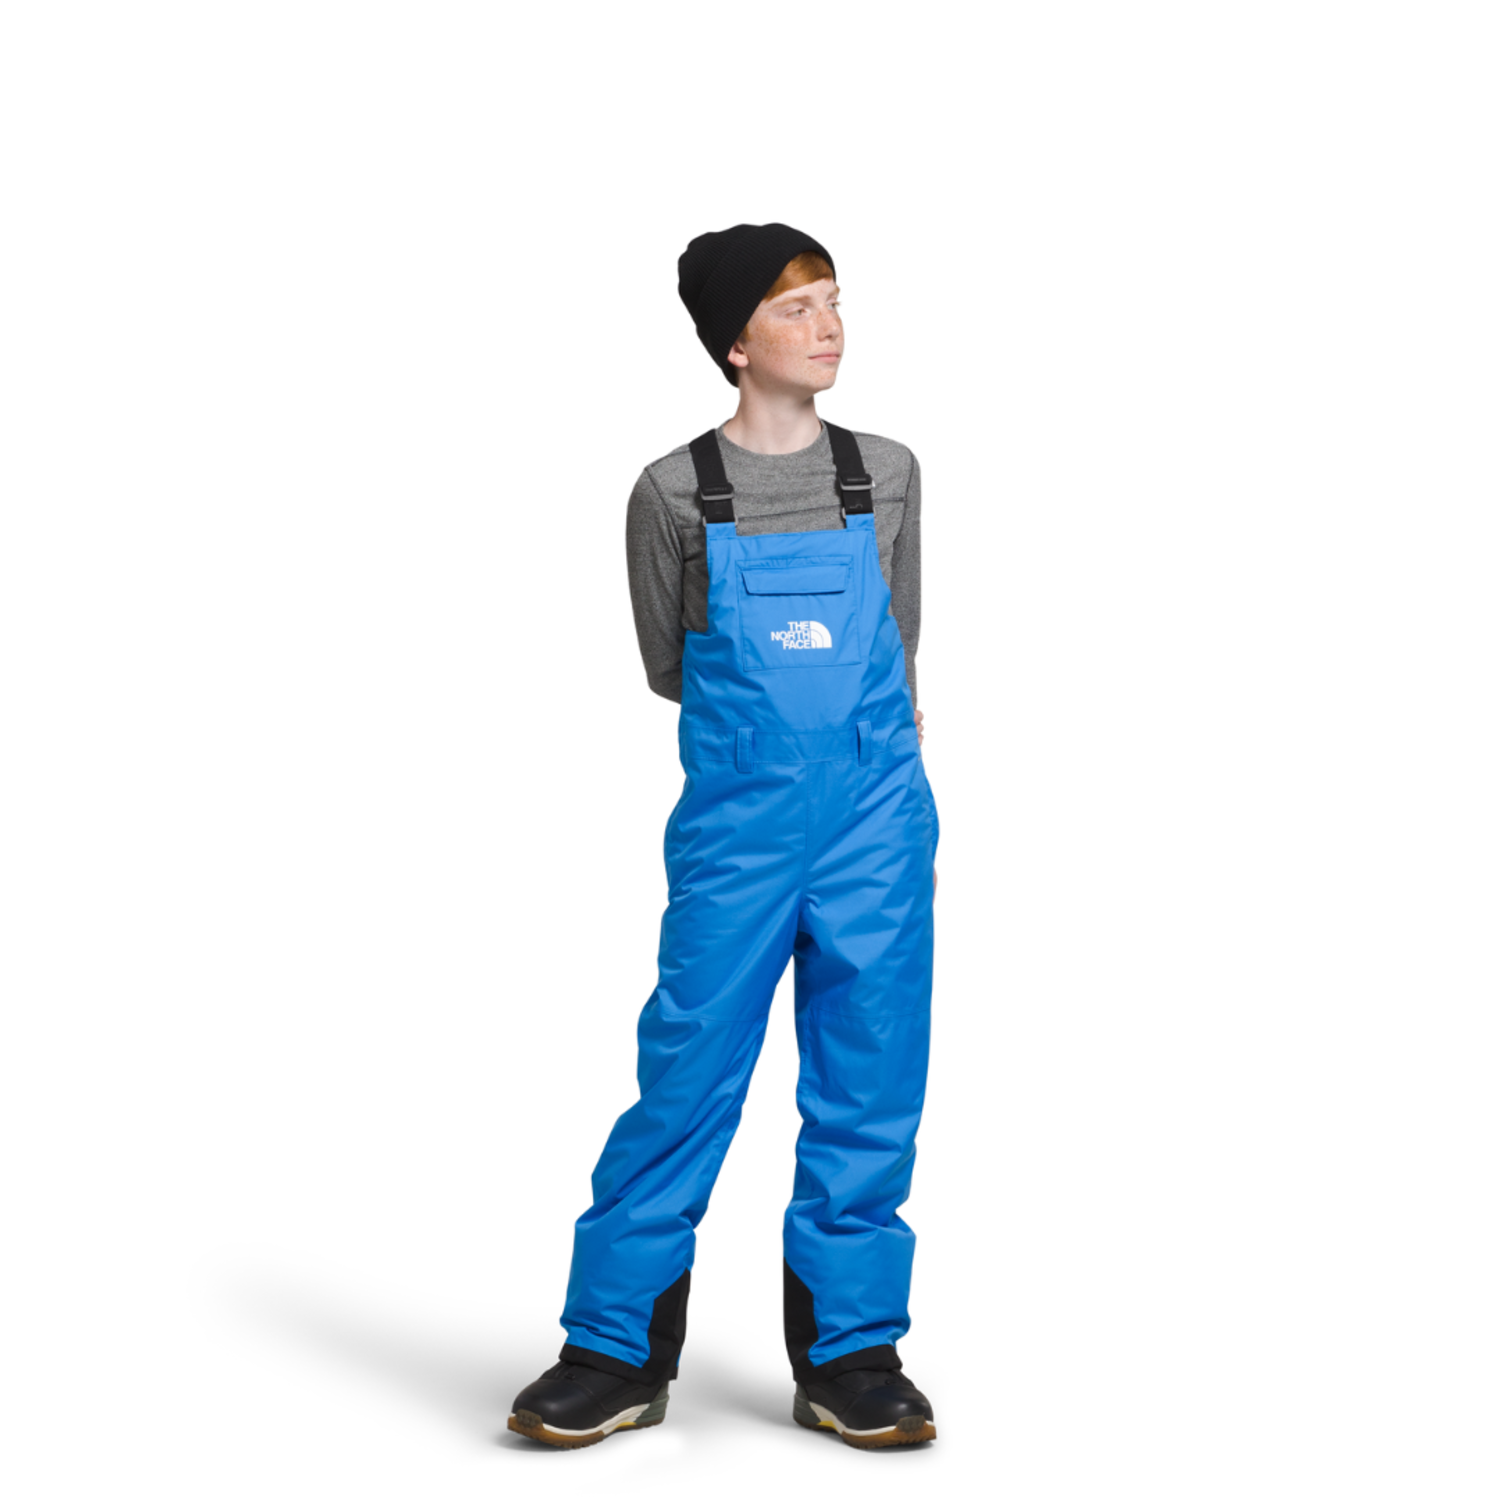 The North Face Freedom Insulated Bib - Kids' - Kids